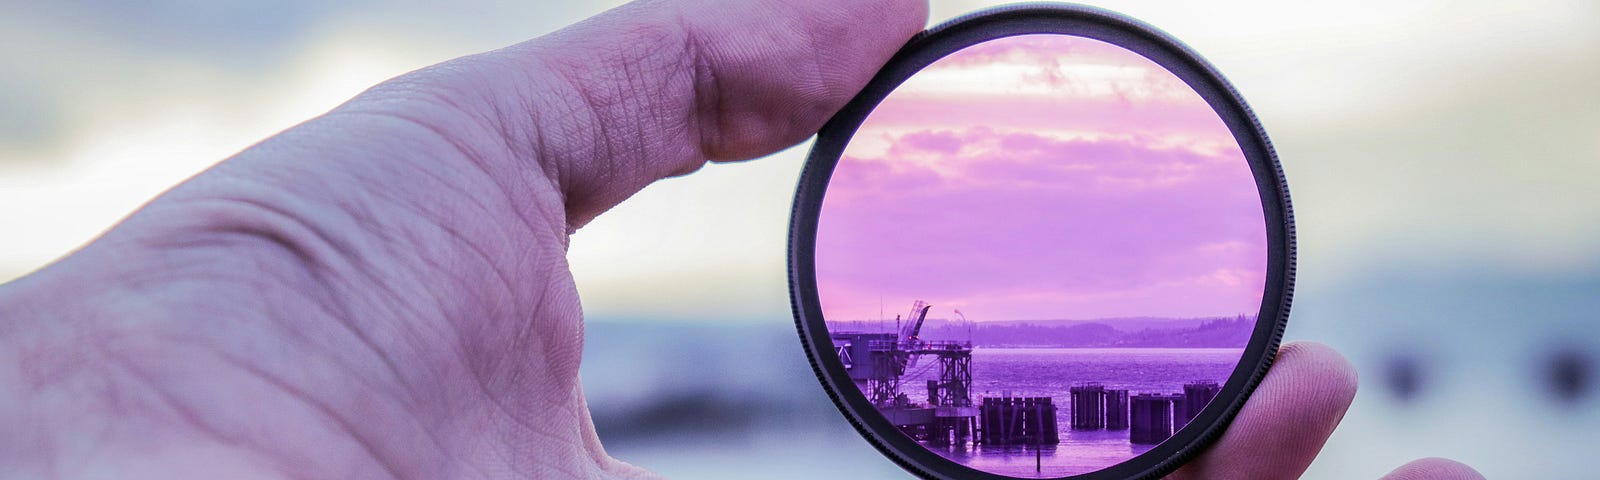 A purple-colored lens in hand shows a harbor and the sea.